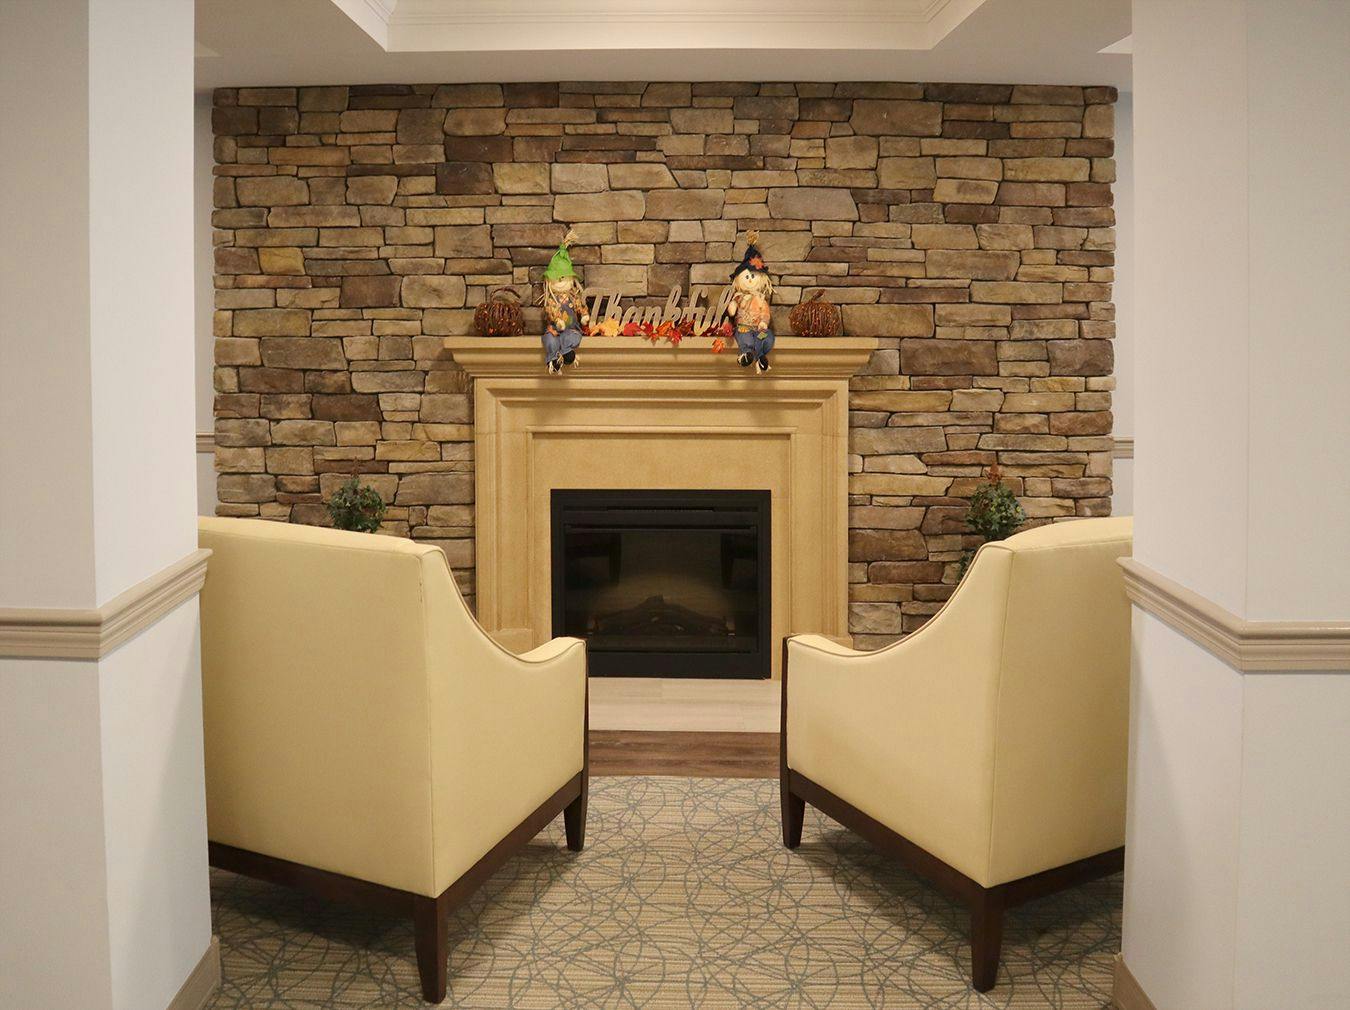 du Lac Living Room With Gas Fireplace